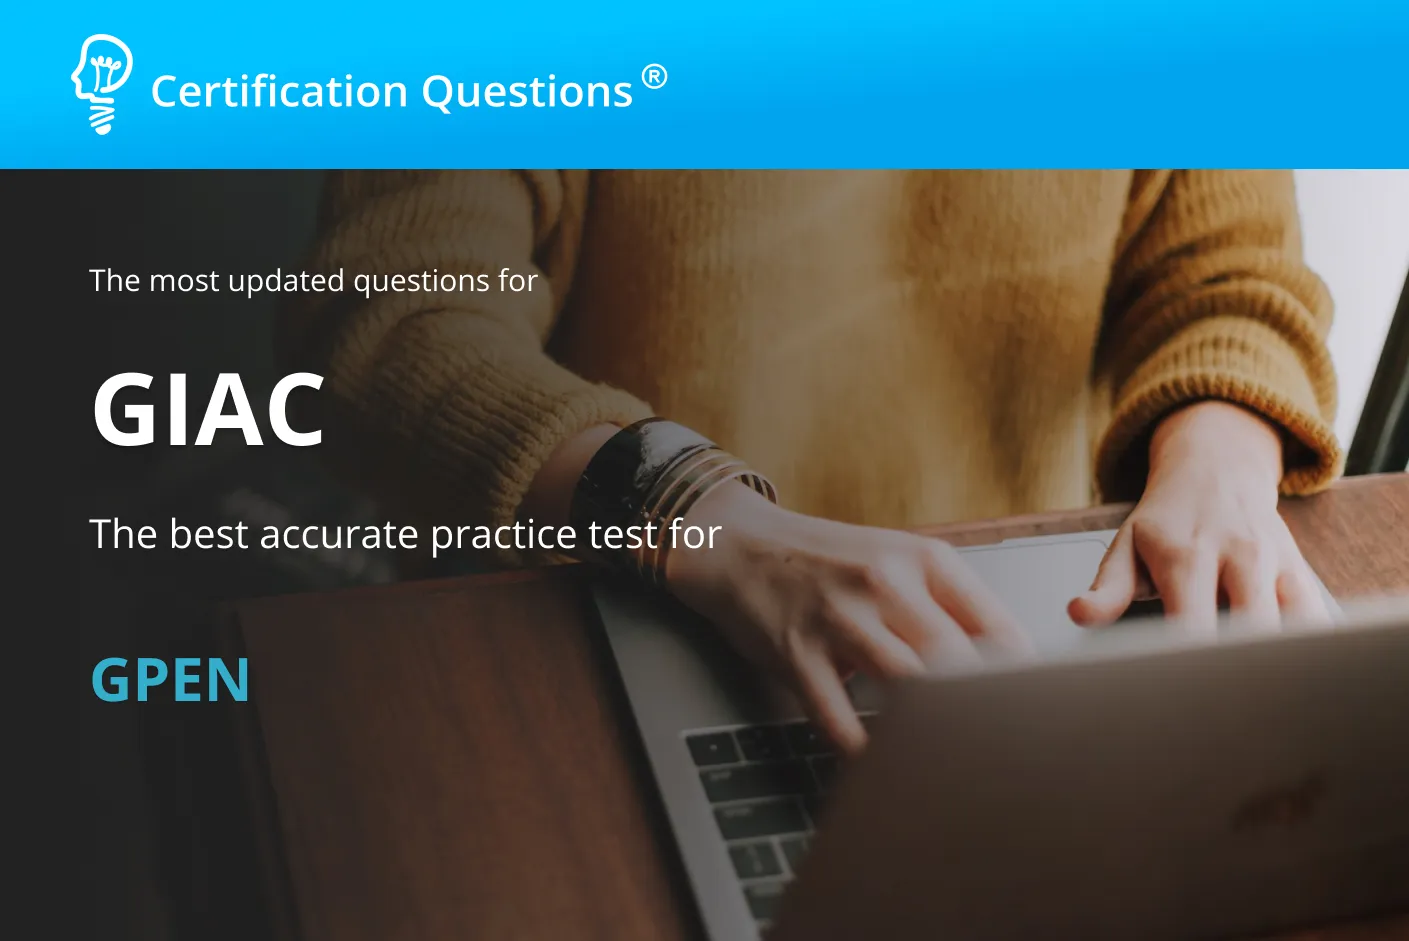 Here is the image for the giac gpen practice test in the United States of America